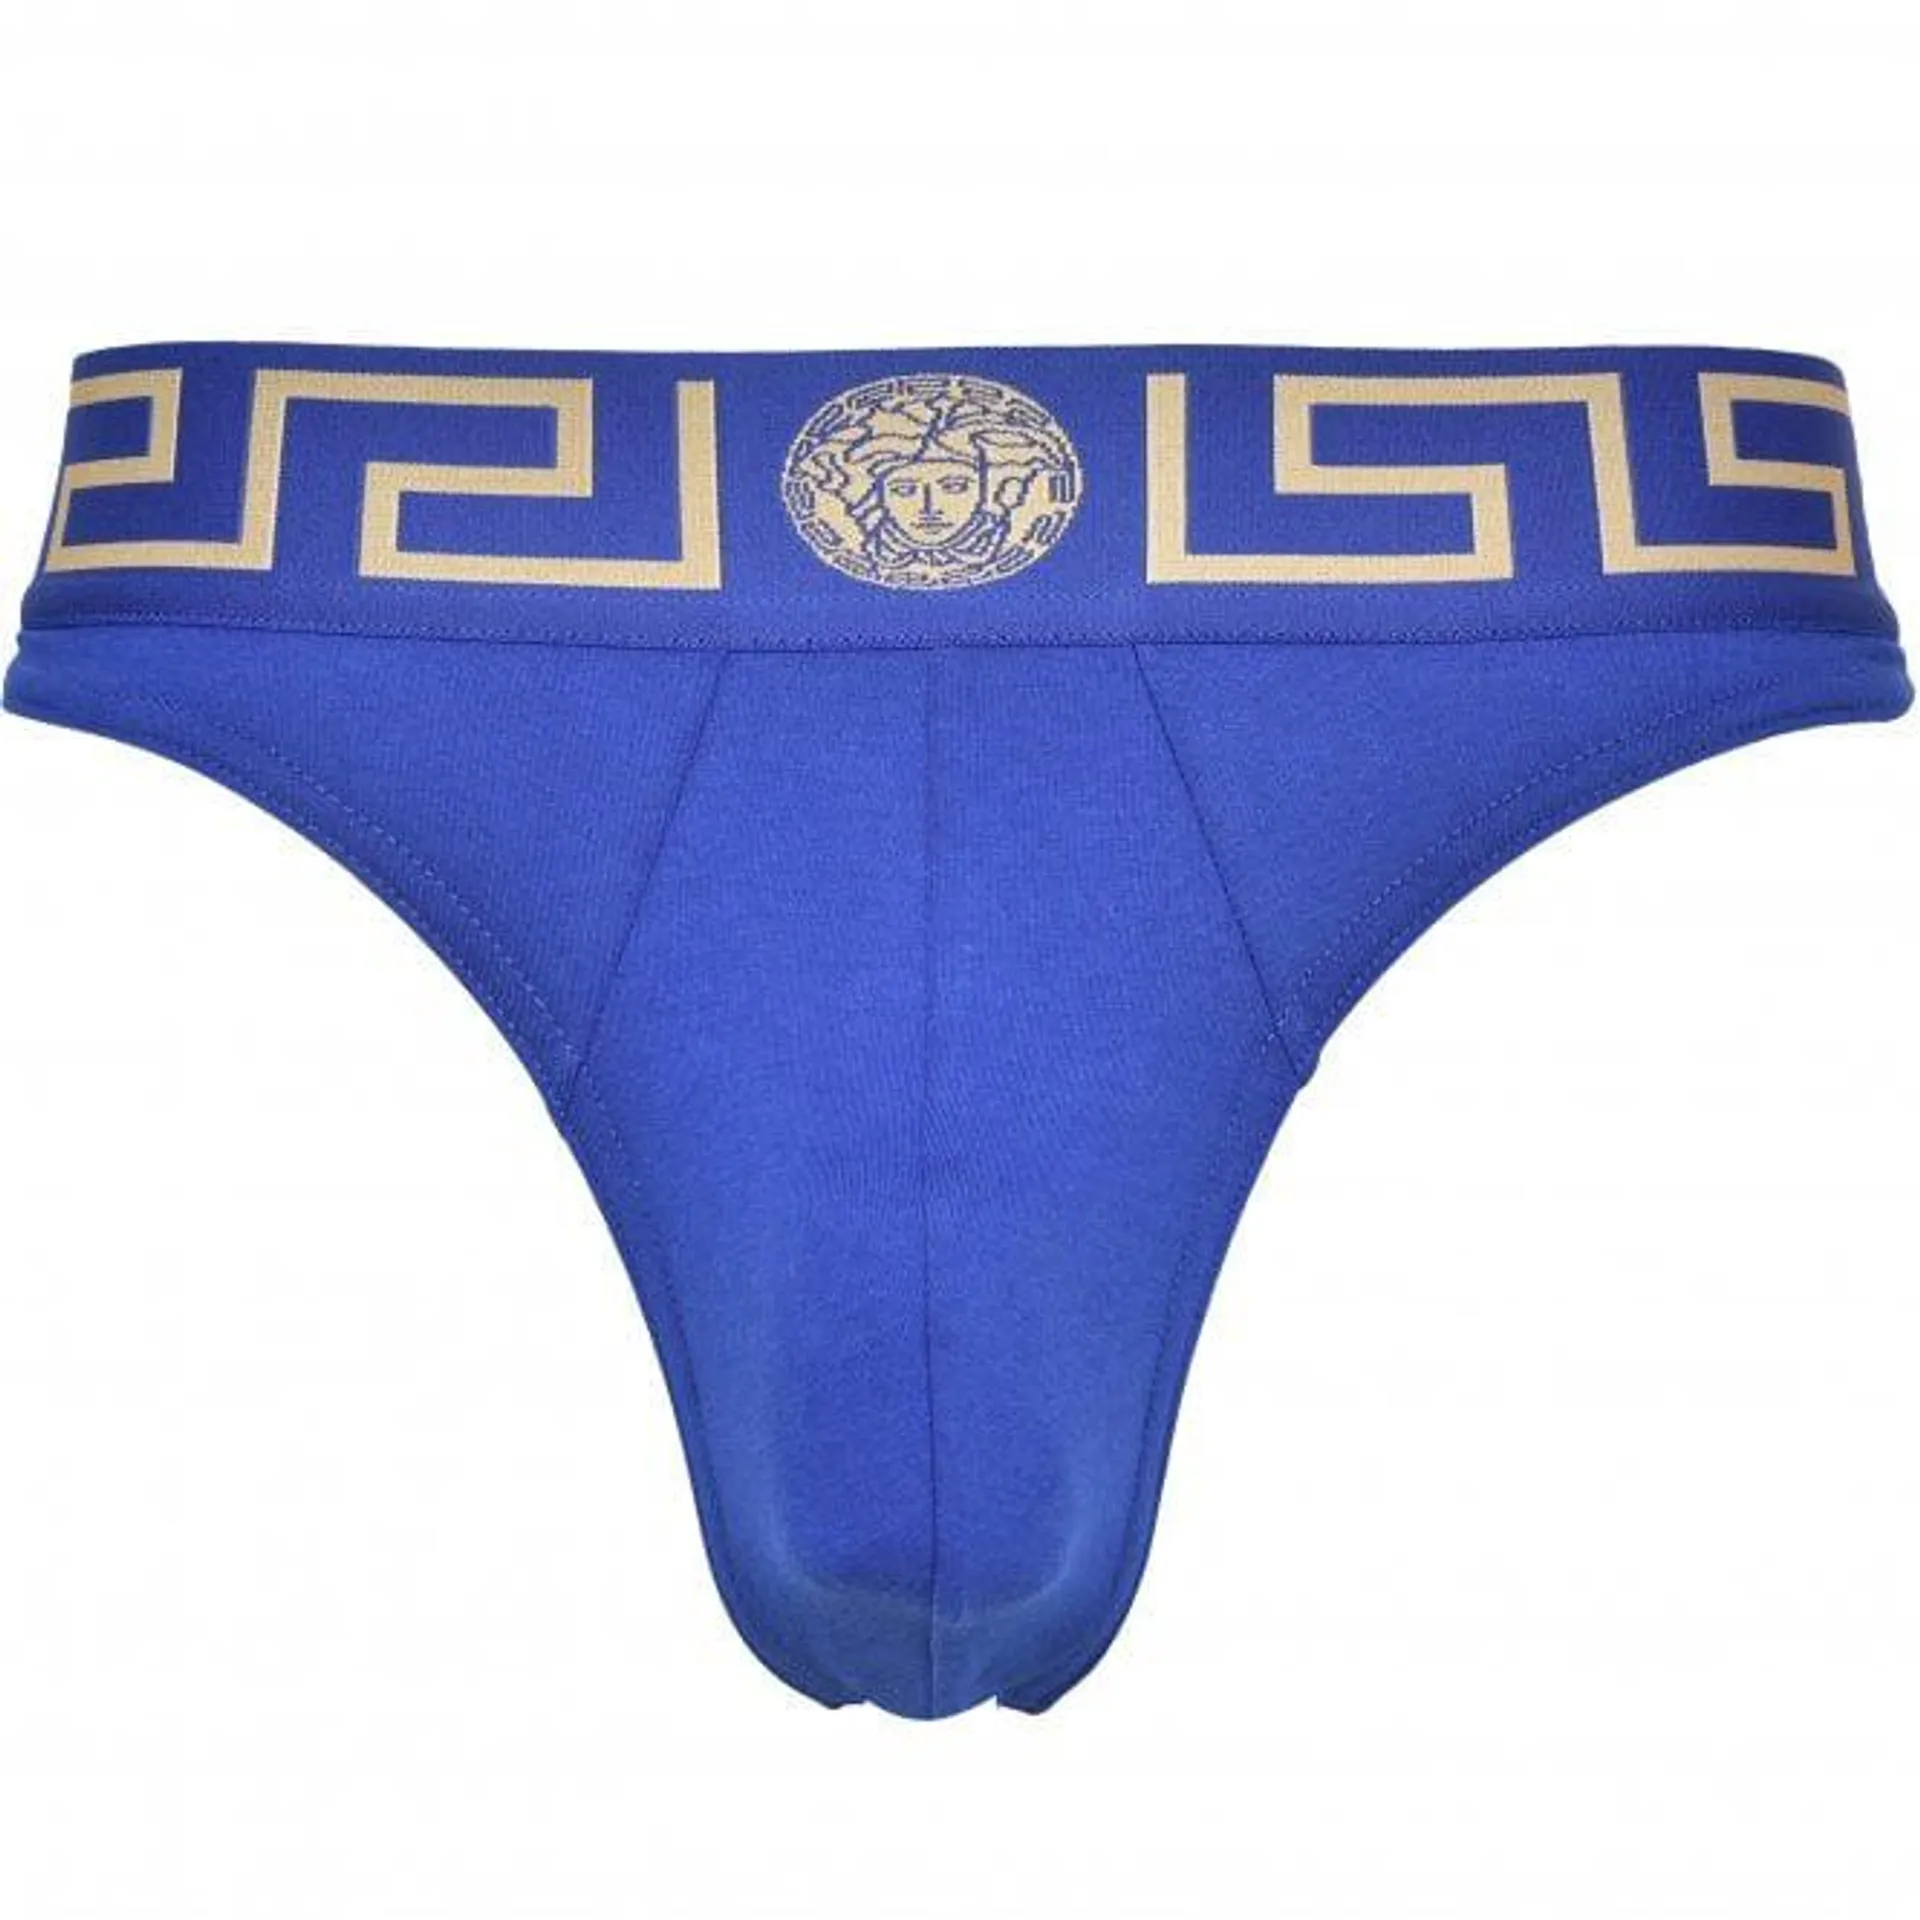 Iconic Thong, Bluette/gold